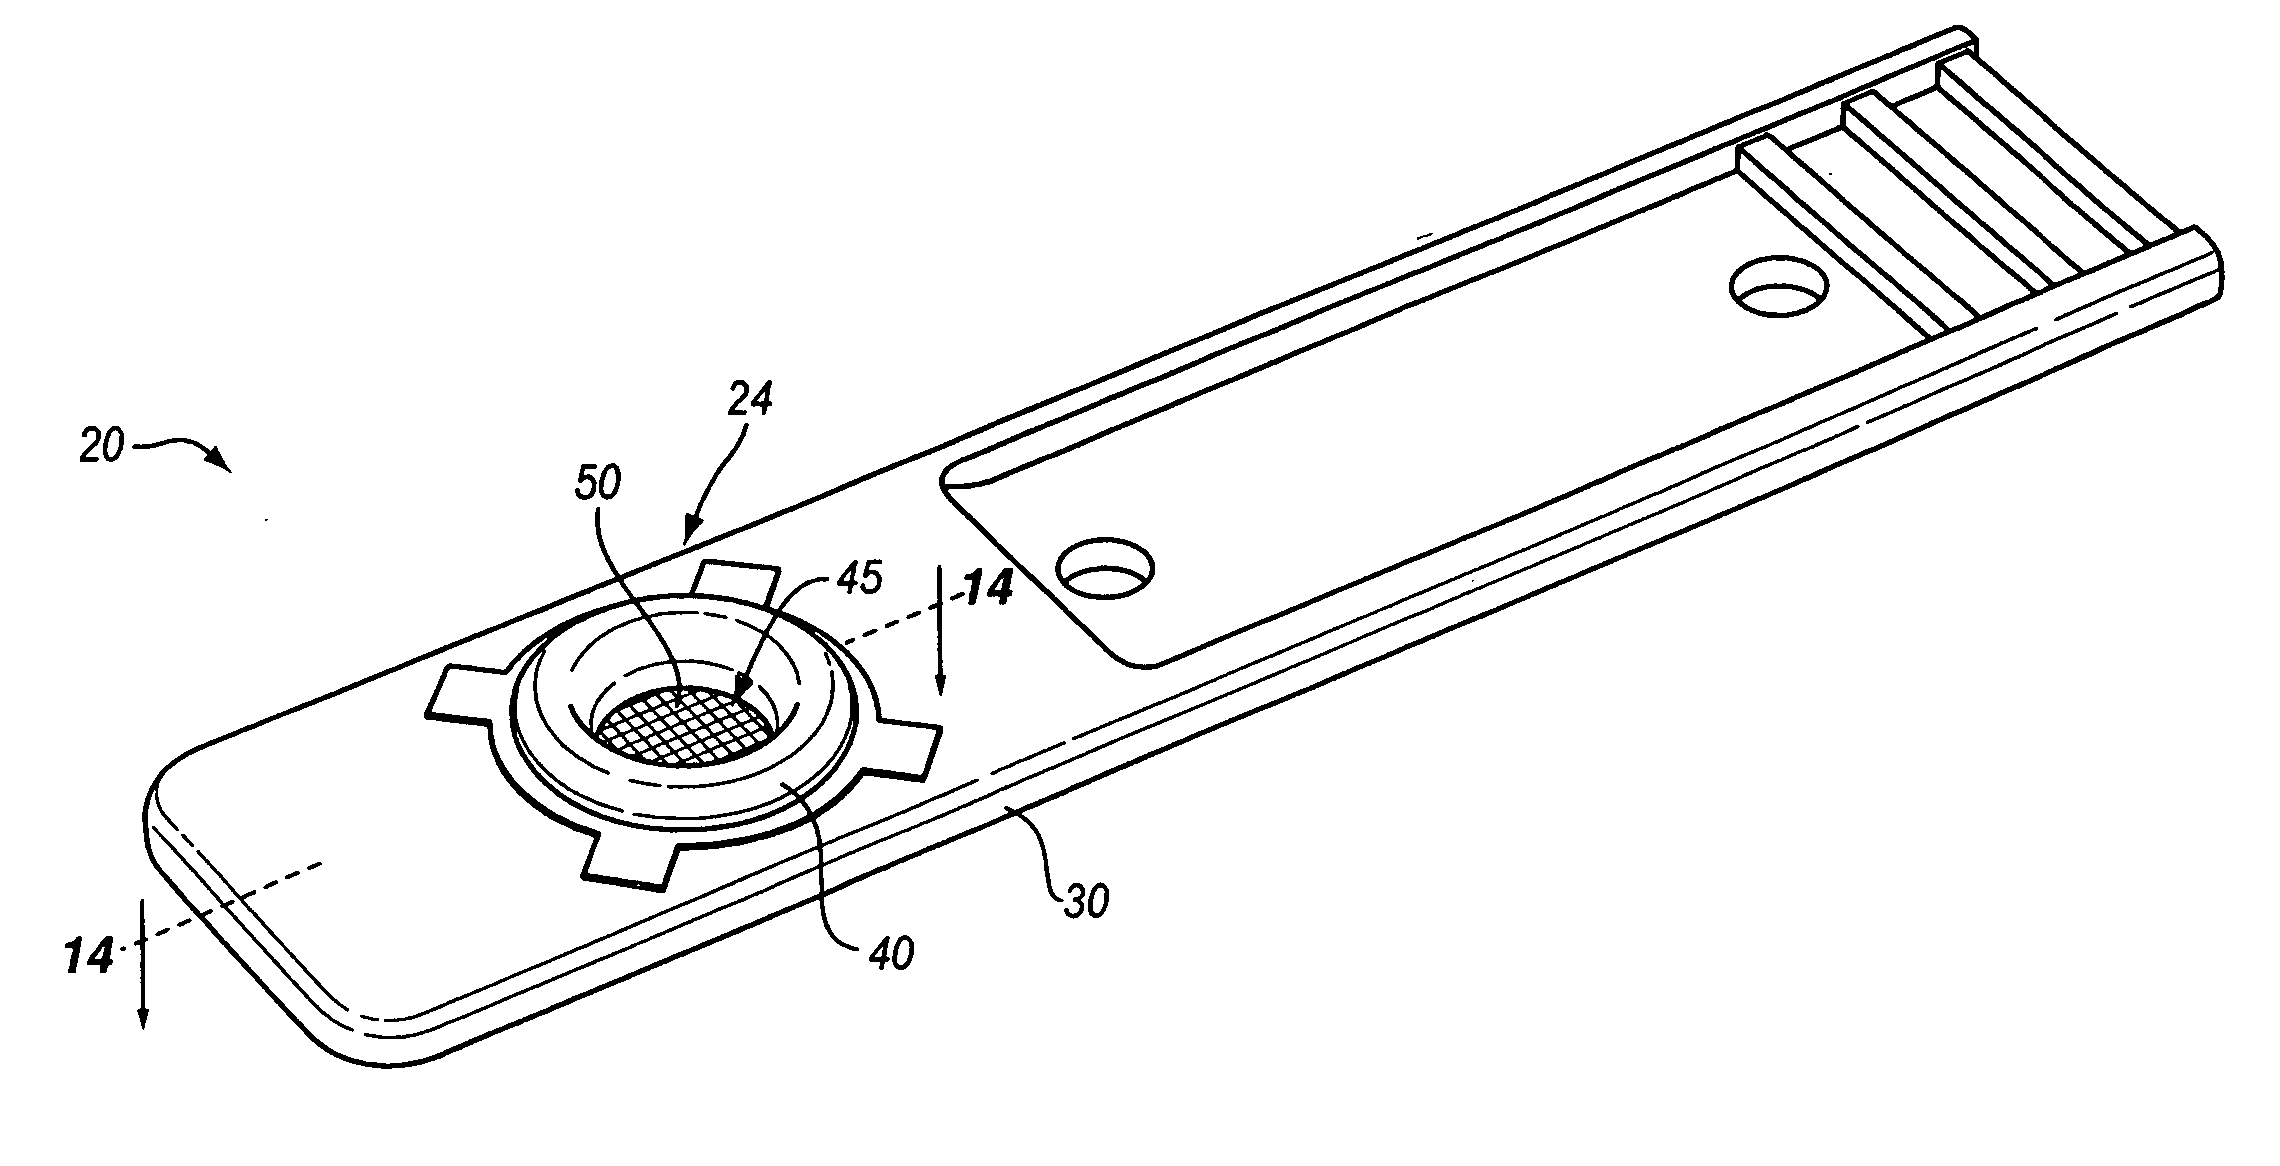 Apparatus and method of manufacturing bodily fluid test strip